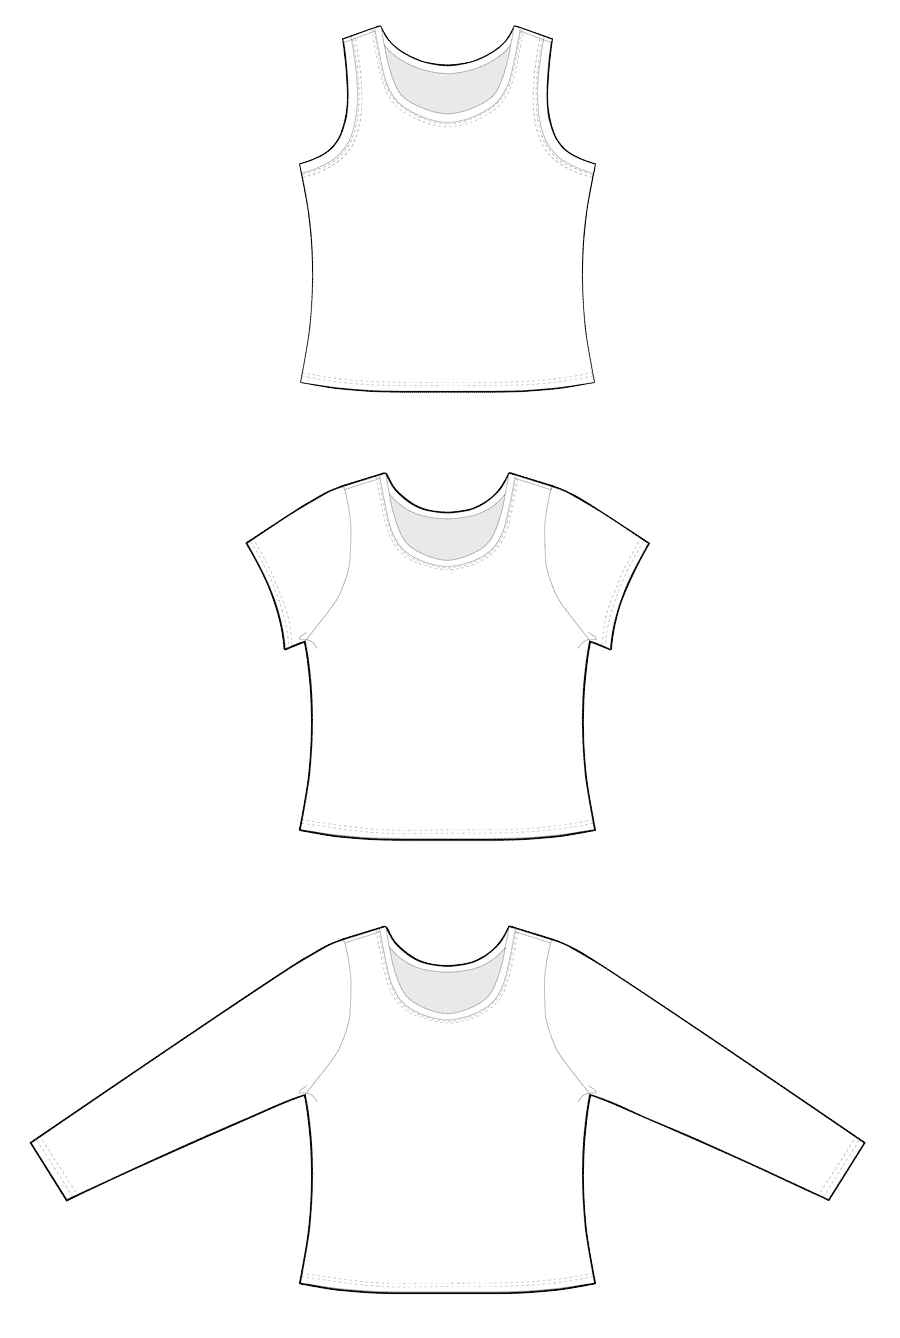 Line drawing of View A of the Bedrock Tee sewing pattern.